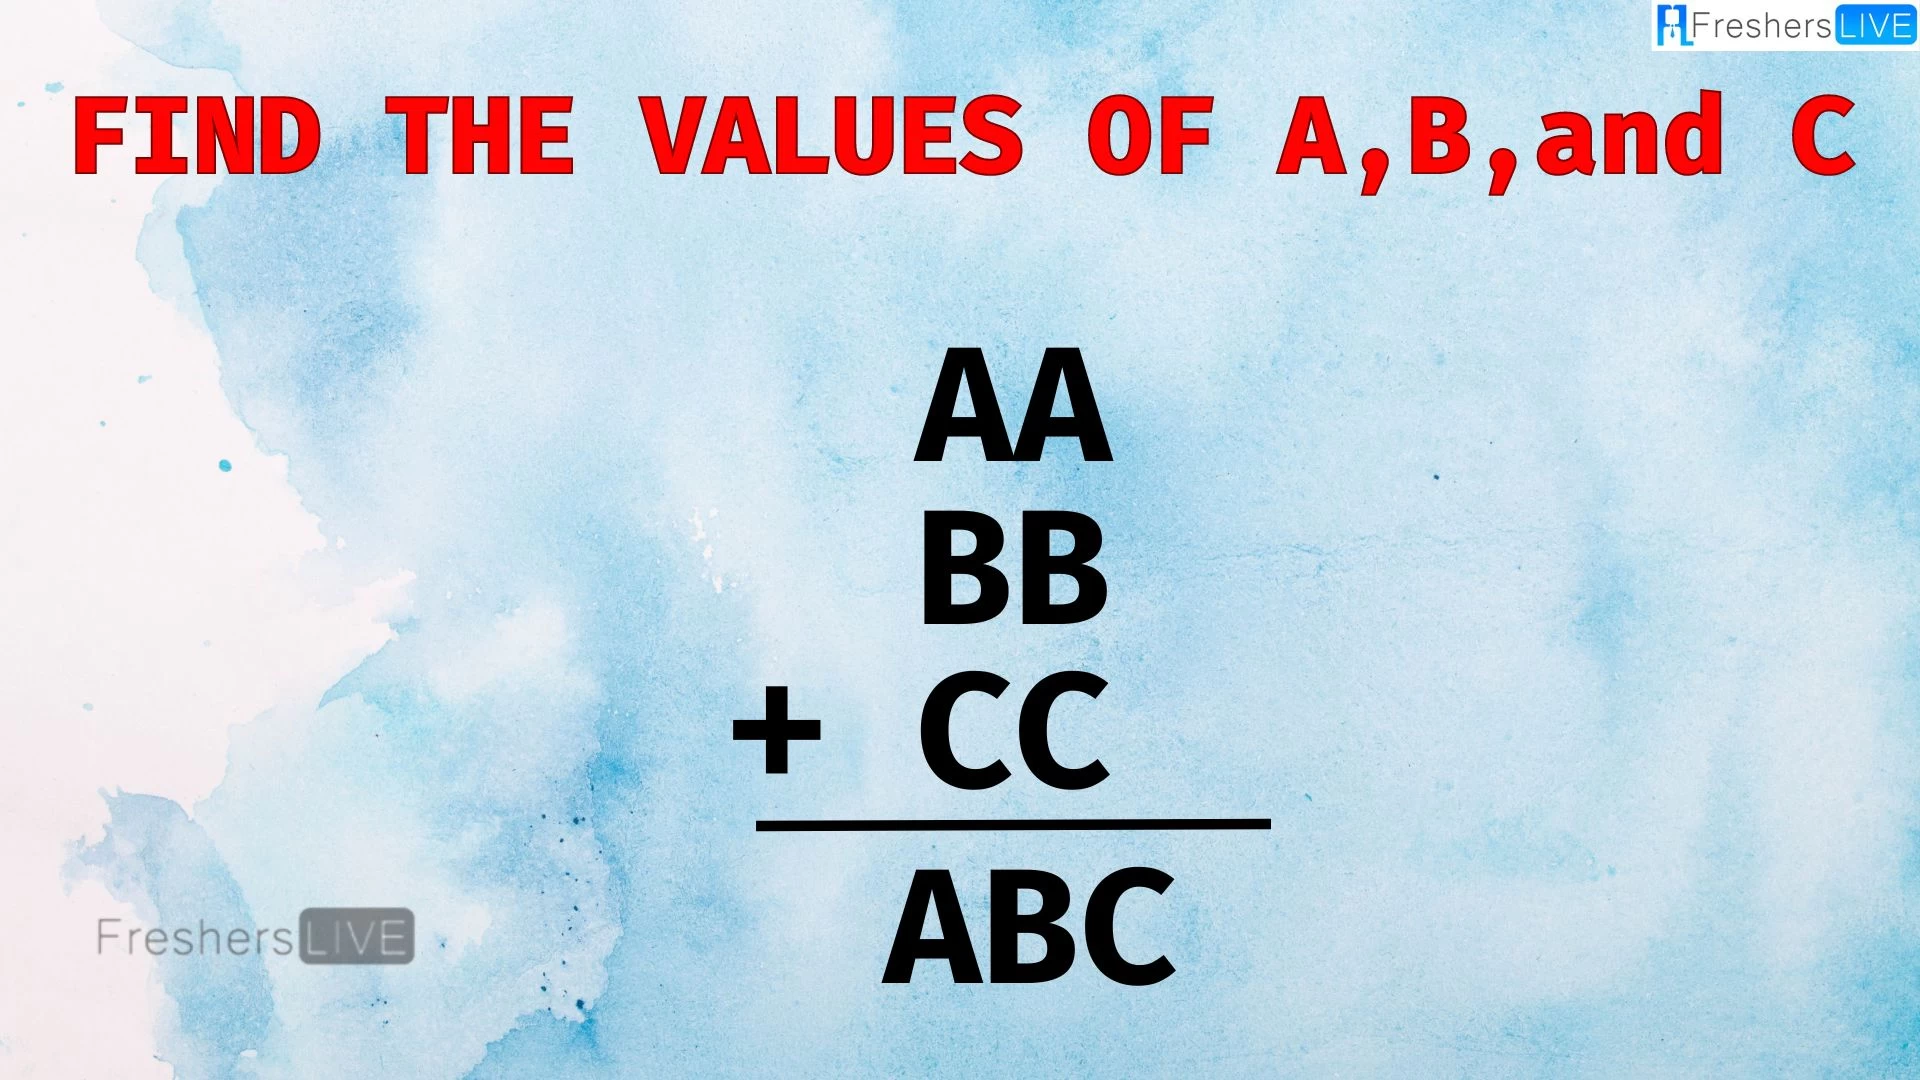 What Values Do A, B, and C Represent in the Equation AA + BB + CC = ABC?